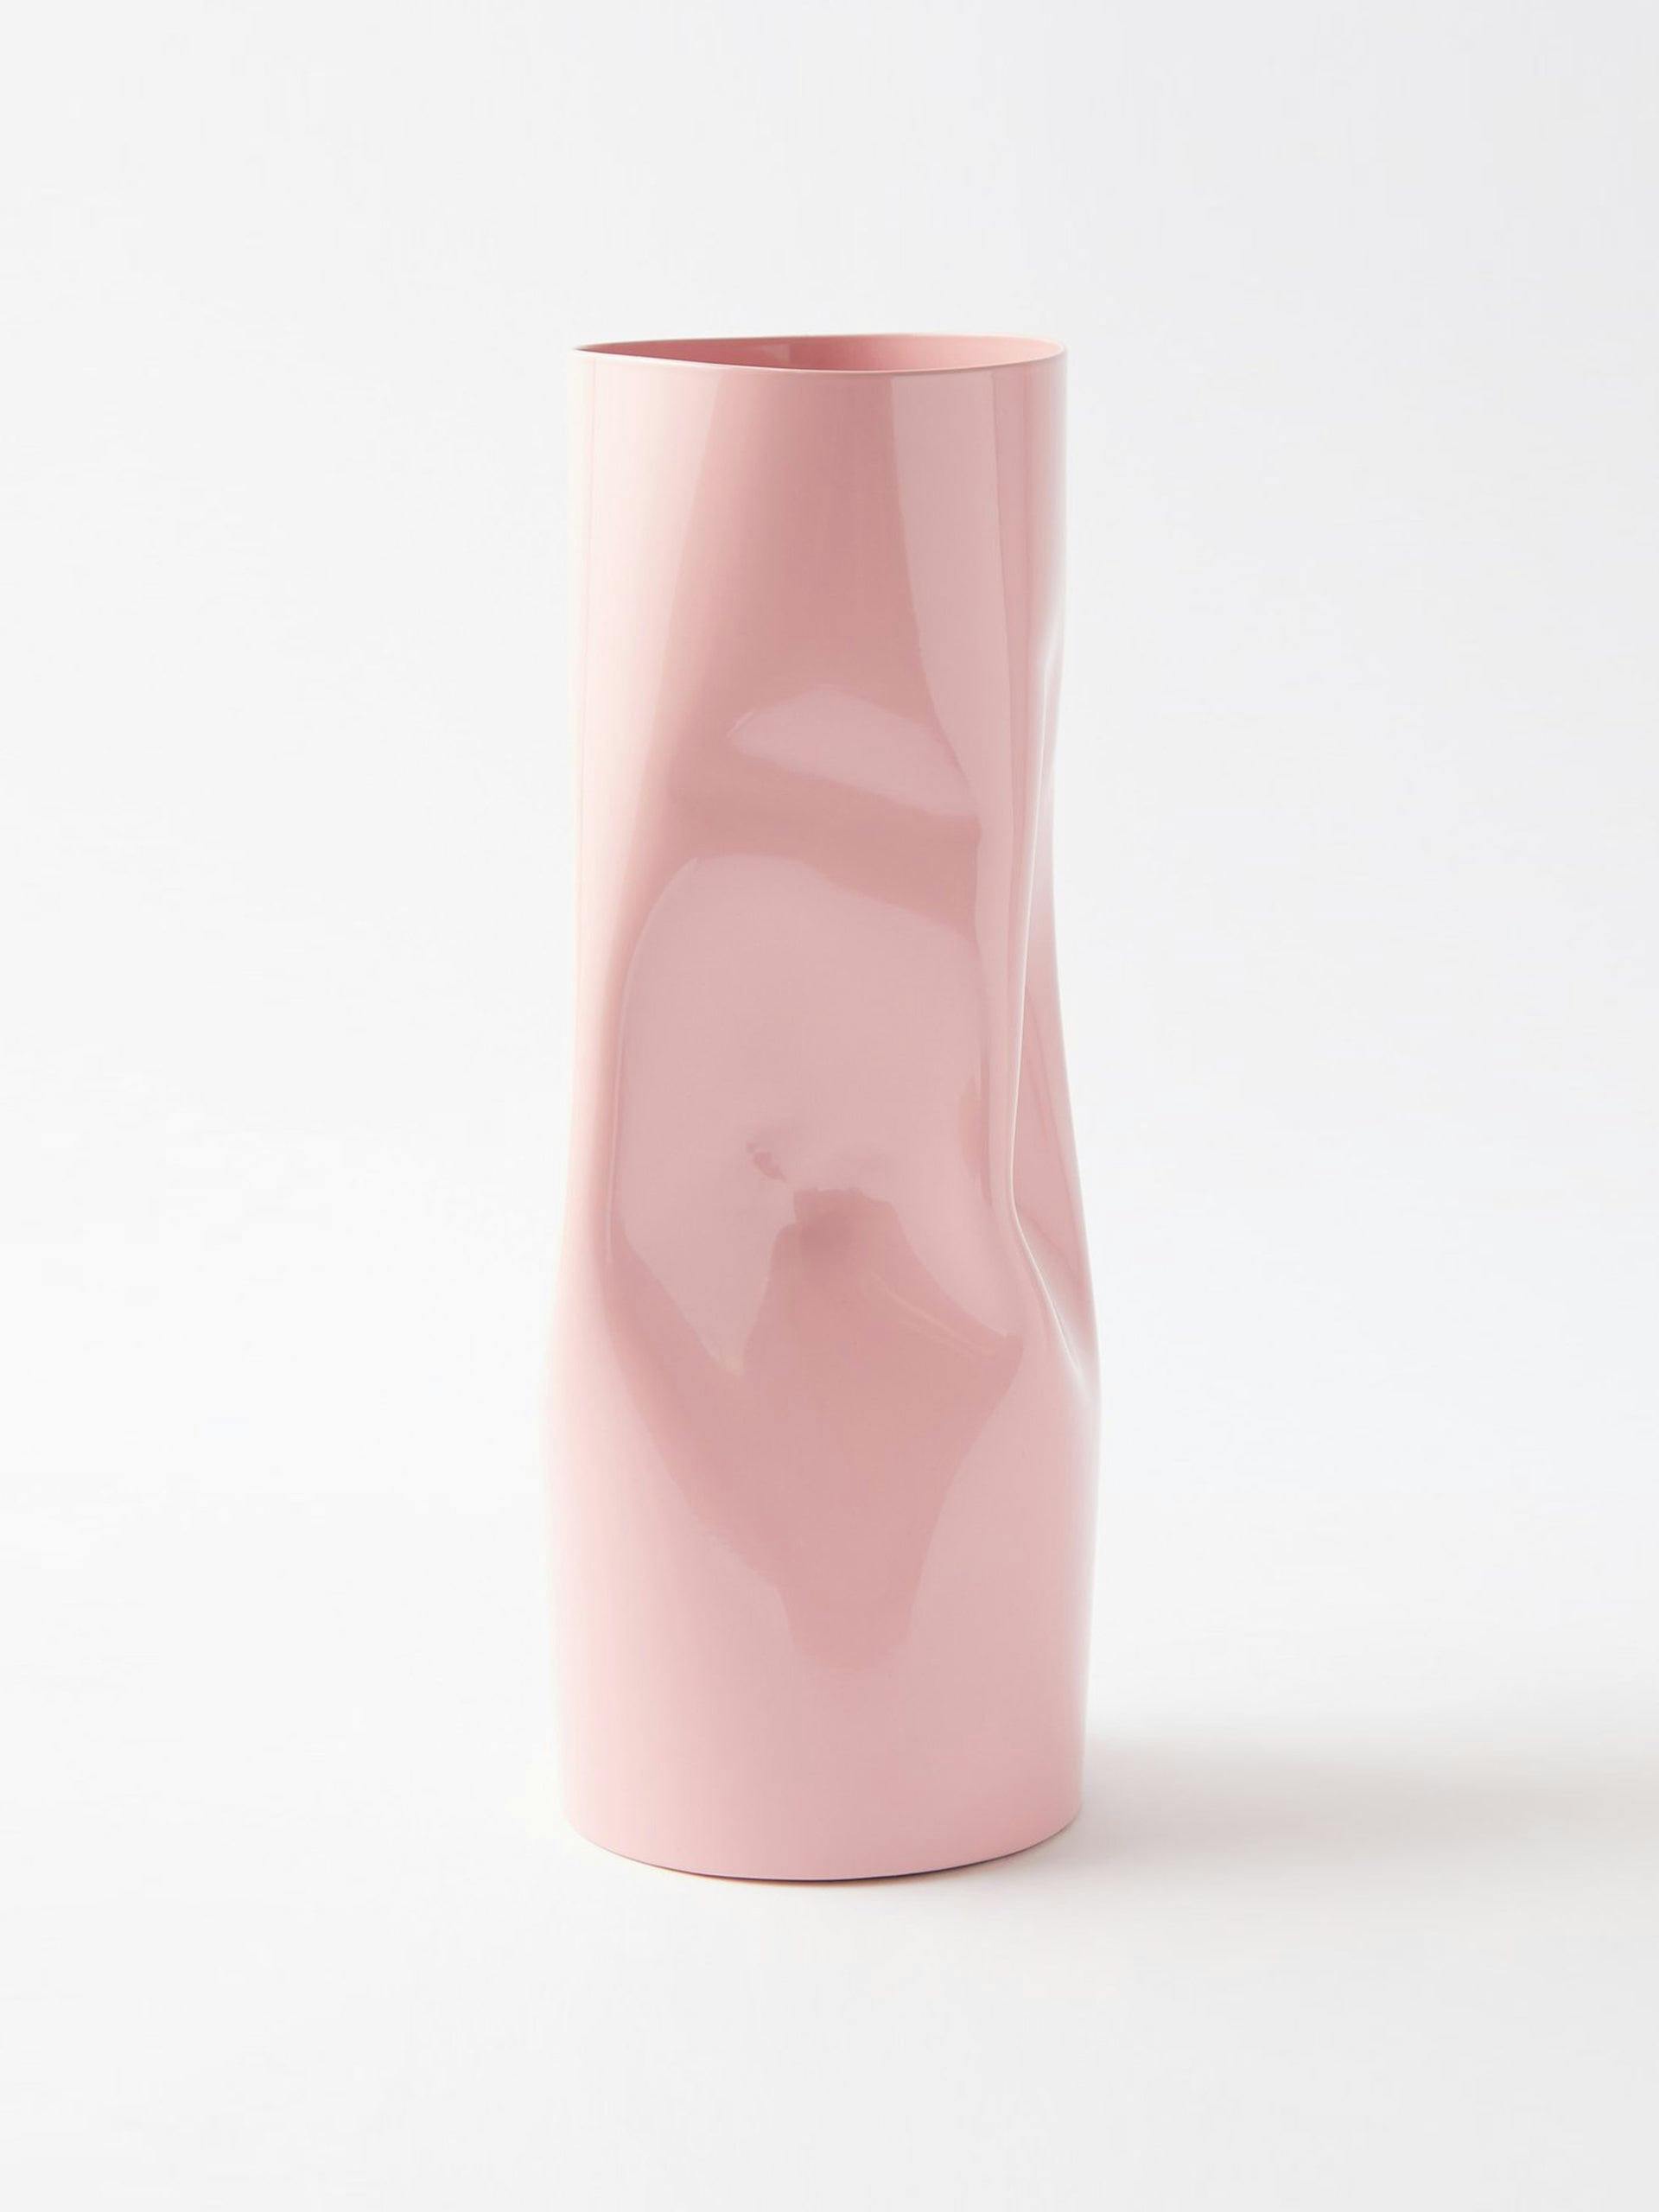 Twisted stainless-steel pink vase